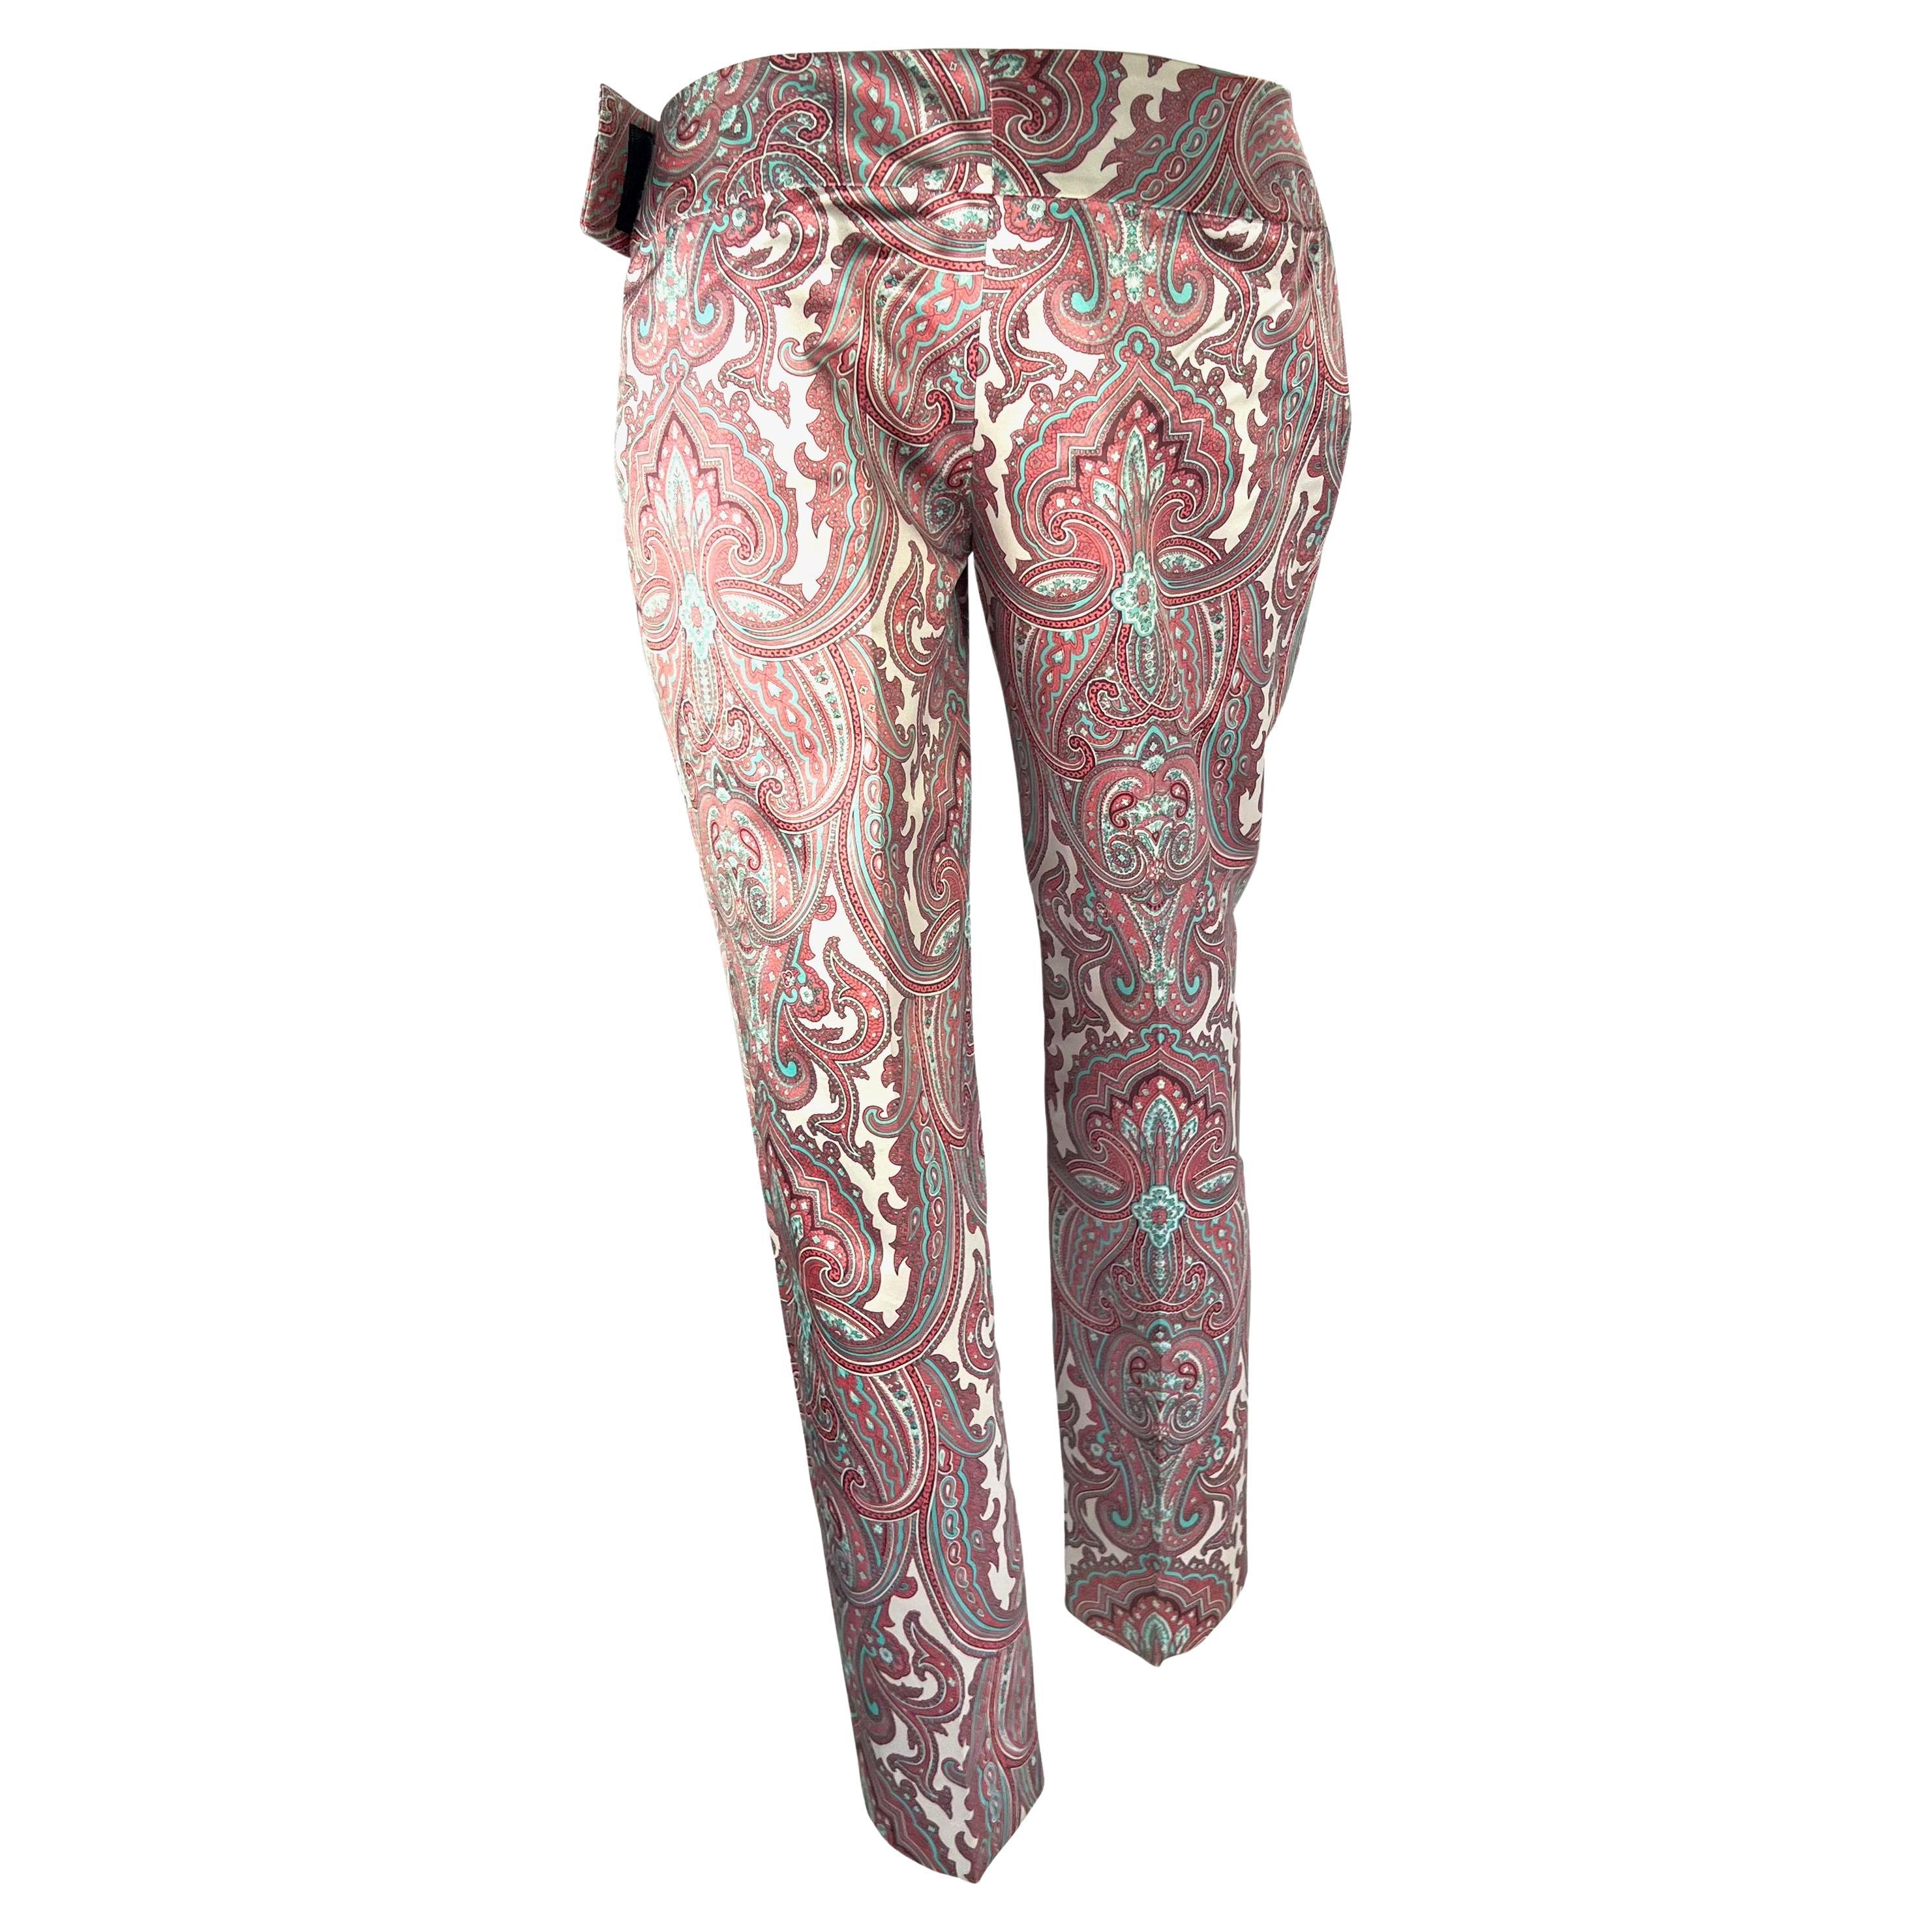 Women's S/S 2000 Dolce & Gabbana White Pink Satin Paisley Print Tapered Cropped Pants For Sale